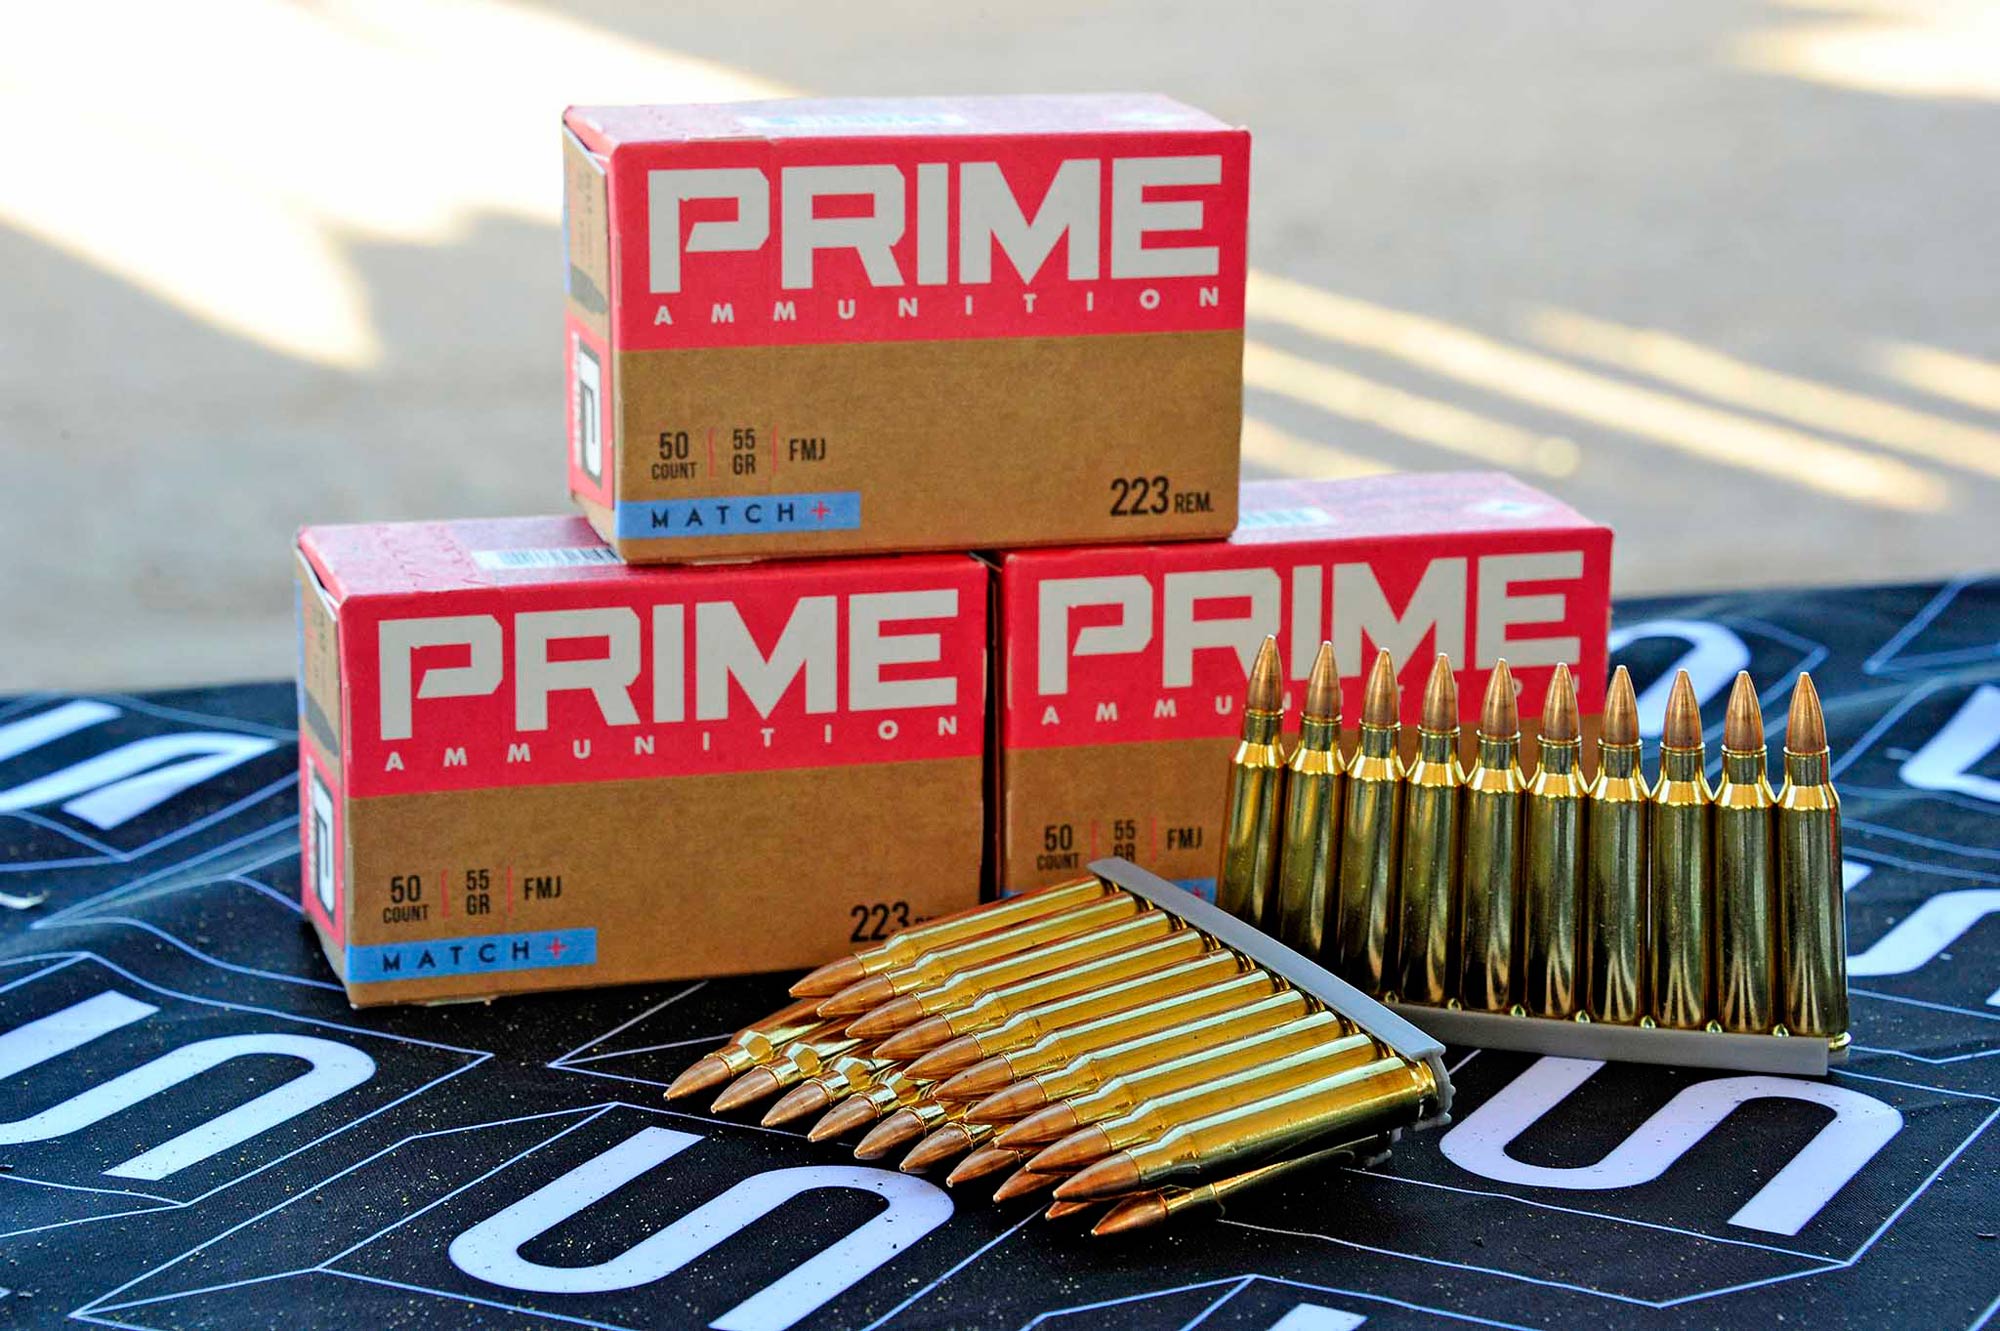 Prime Ammunition: a new line of ammo for Tactical Shooting and Home-Defense...